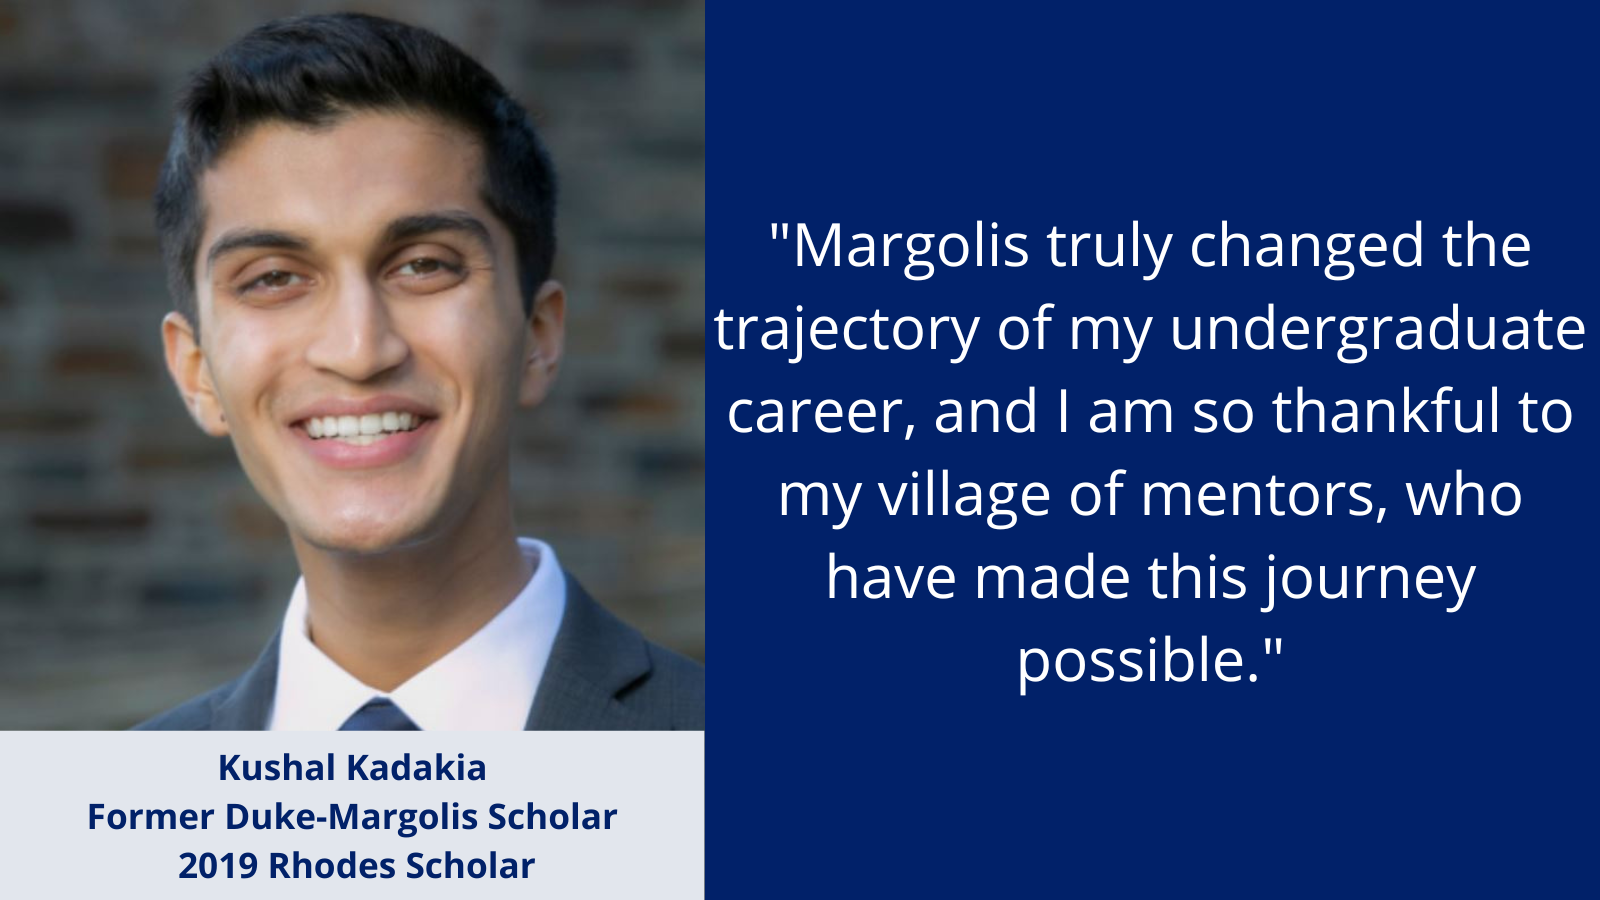 "Margolis truly changed the trajectory of my undergraduate career, and I am so thankful to my village of mentors, who have made this journey possible."